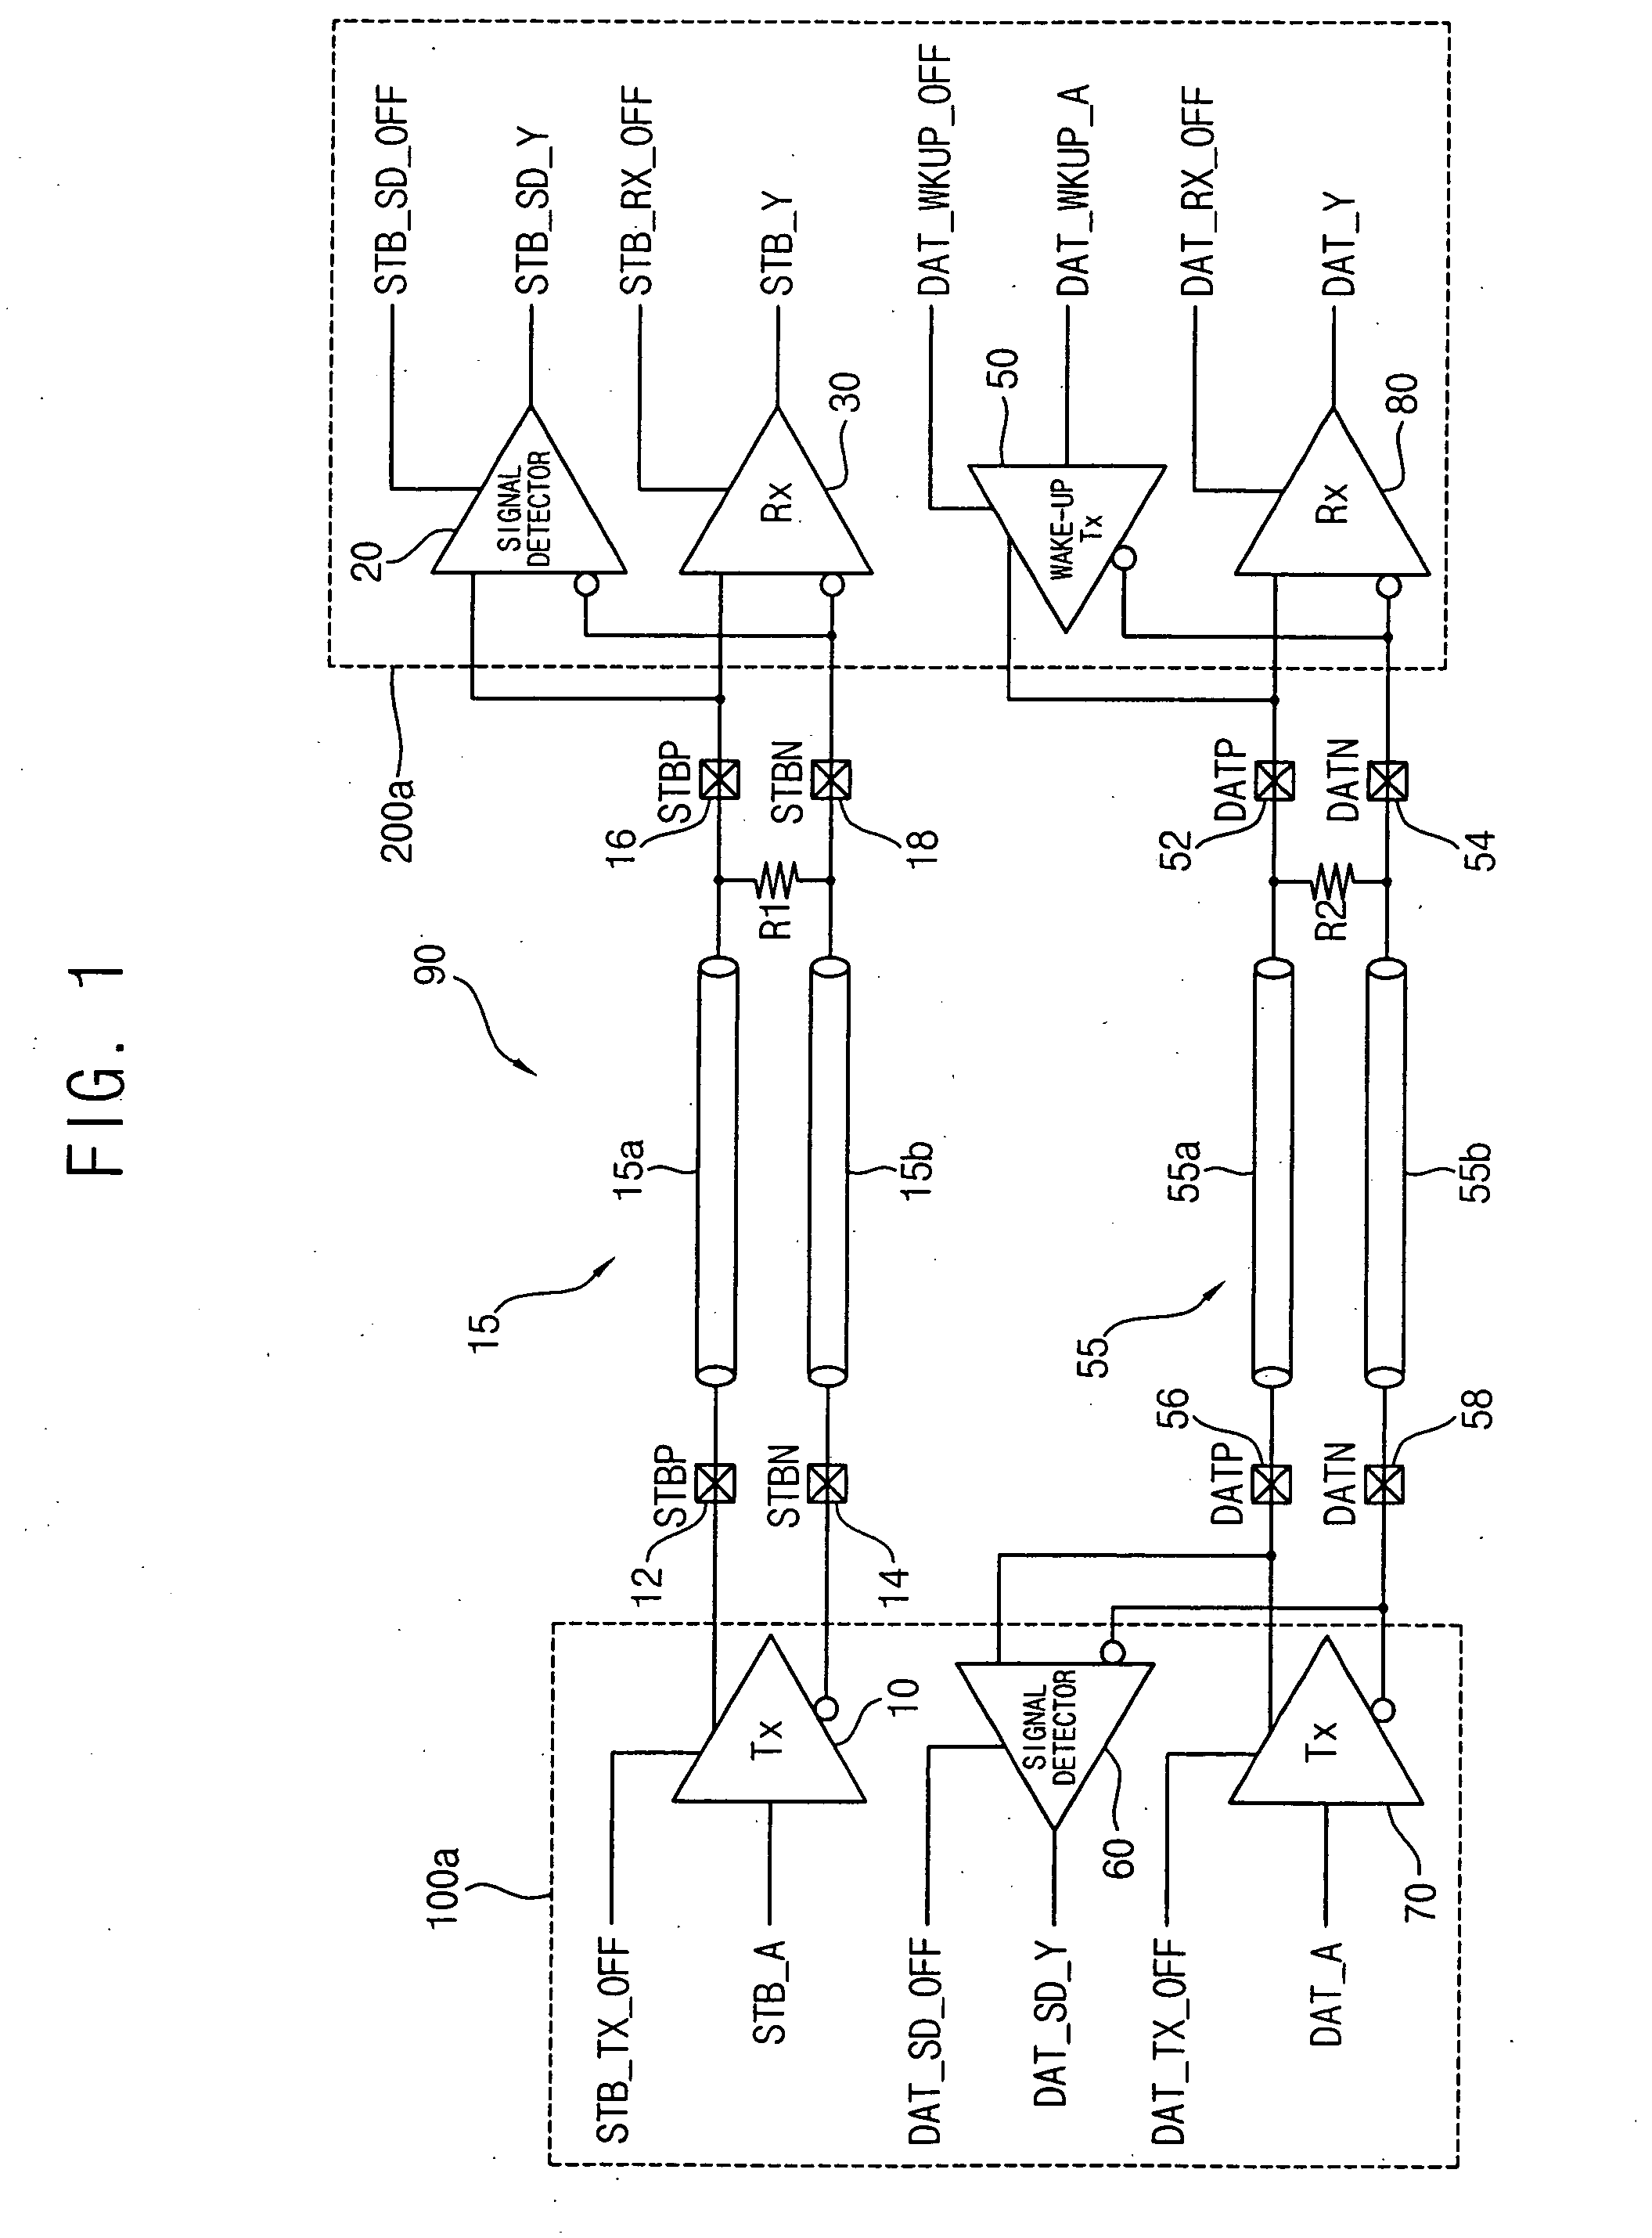 Data communication system and method with multi-channel power-down and wake-up